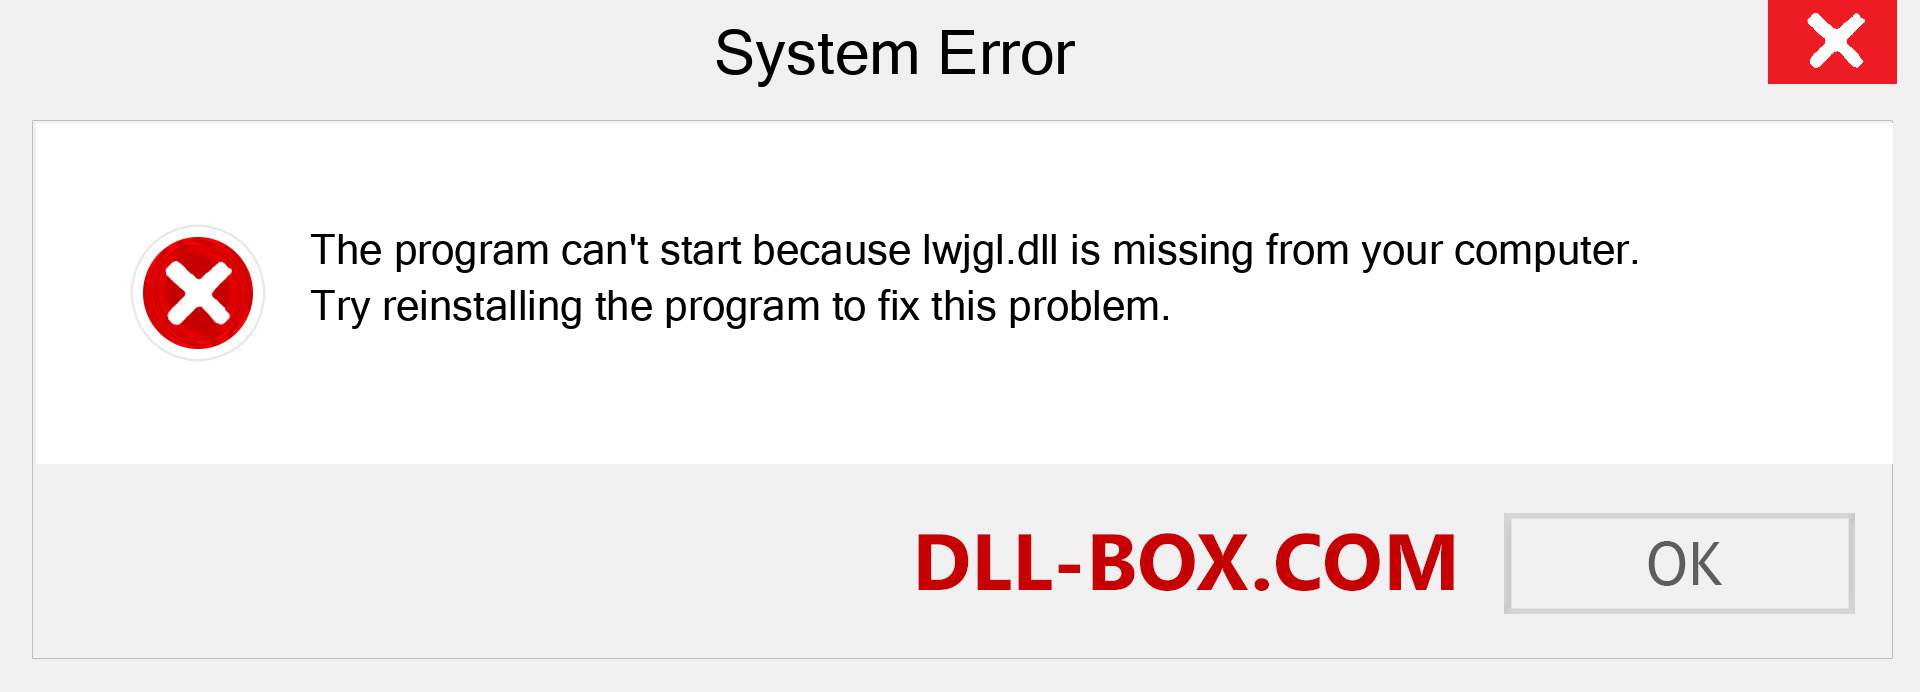  lwjgl.dll file is missing?. Download for Windows 7, 8, 10 - Fix  lwjgl dll Missing Error on Windows, photos, images